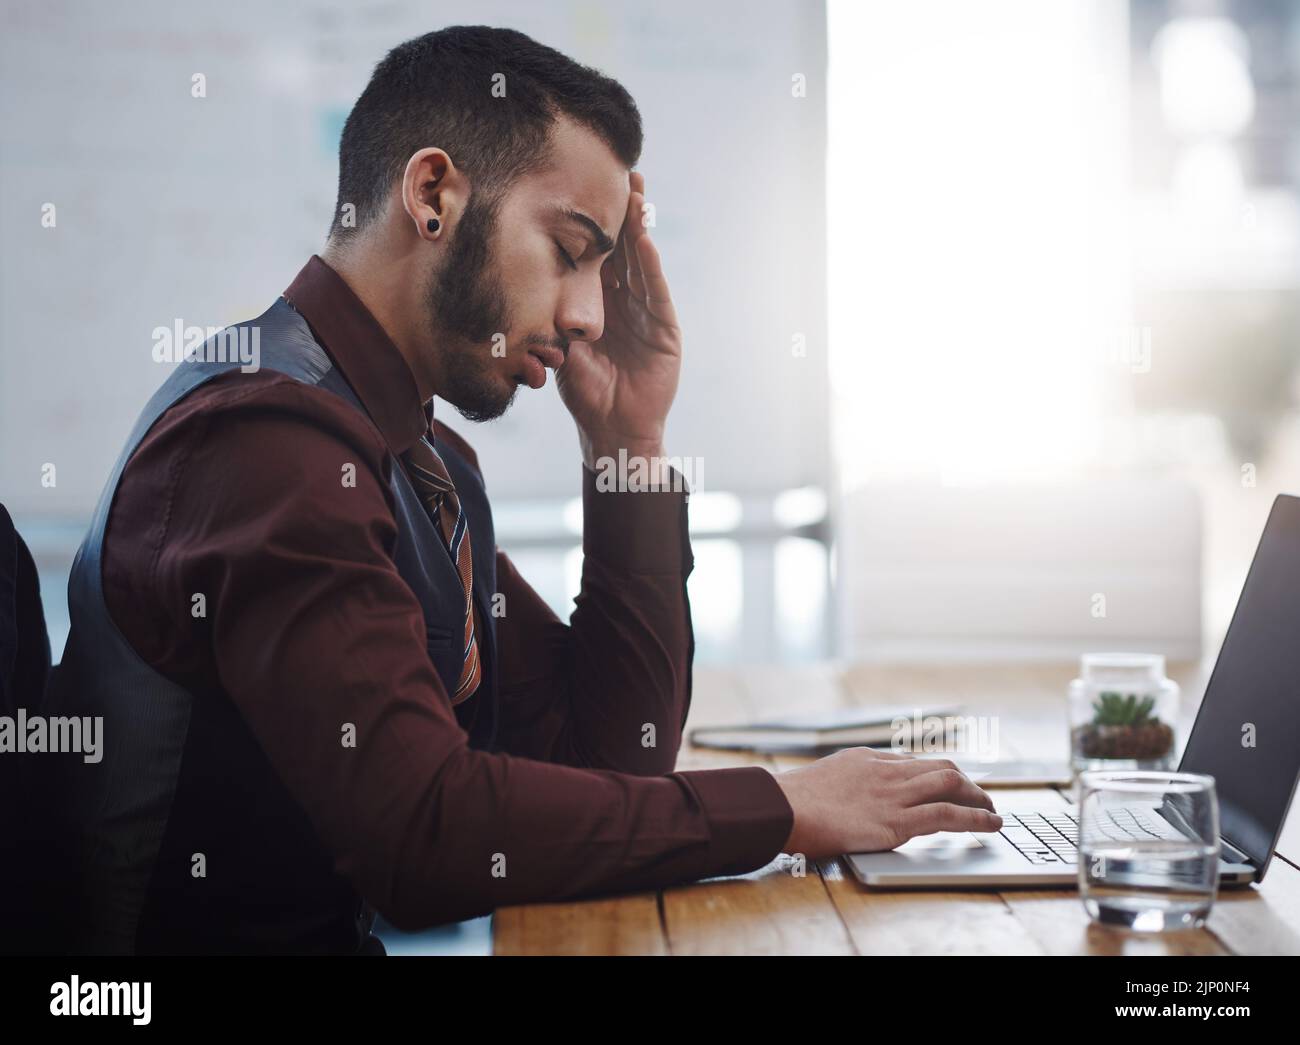 This headache is just the most frustrating. a young businessman looking stressed out while working in an office. Stock Photo